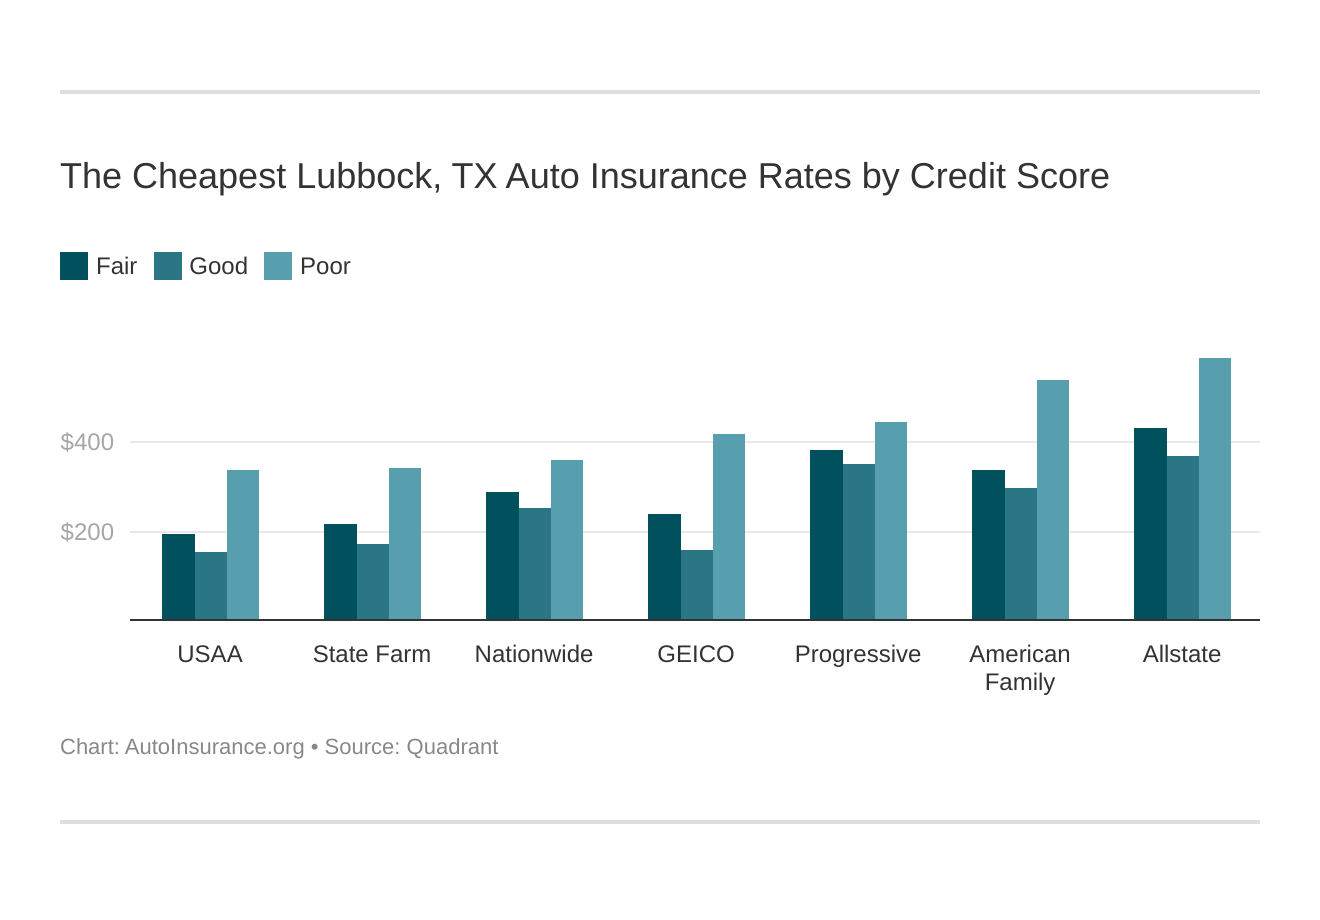 The Cheapest Lubbock, TX Auto Insurance Rates by Credit Score